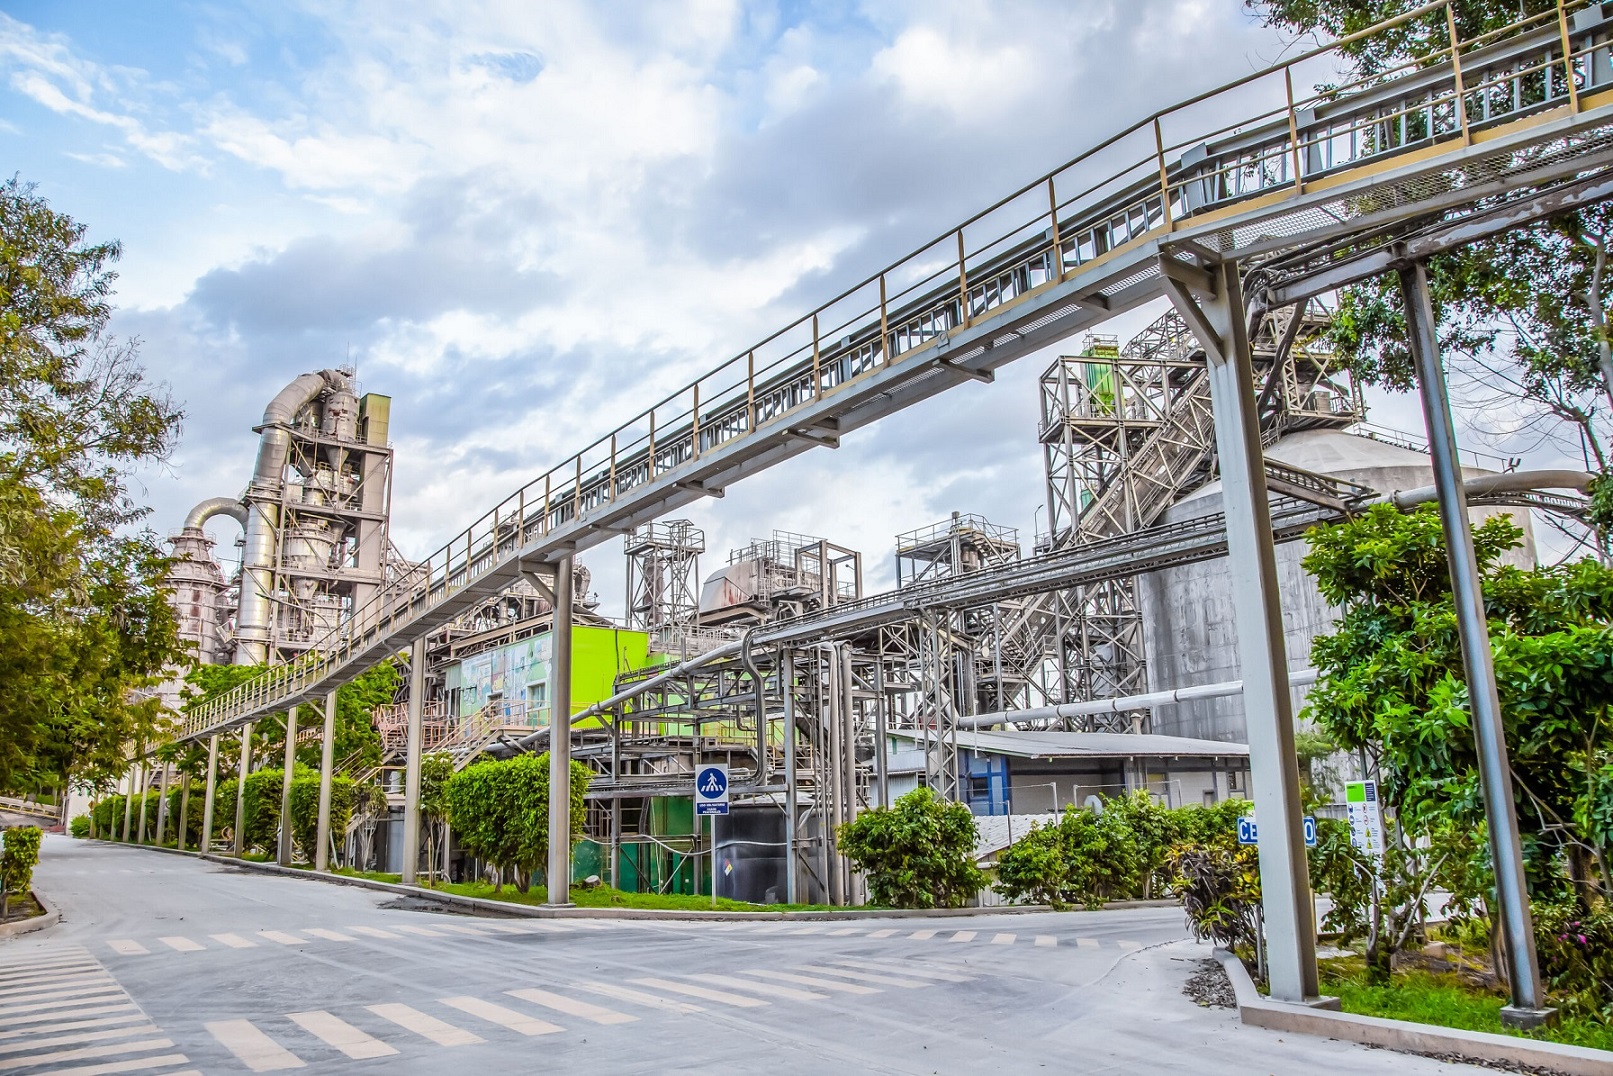 The investment will increase cement production at Argos' Piedras Azules plant